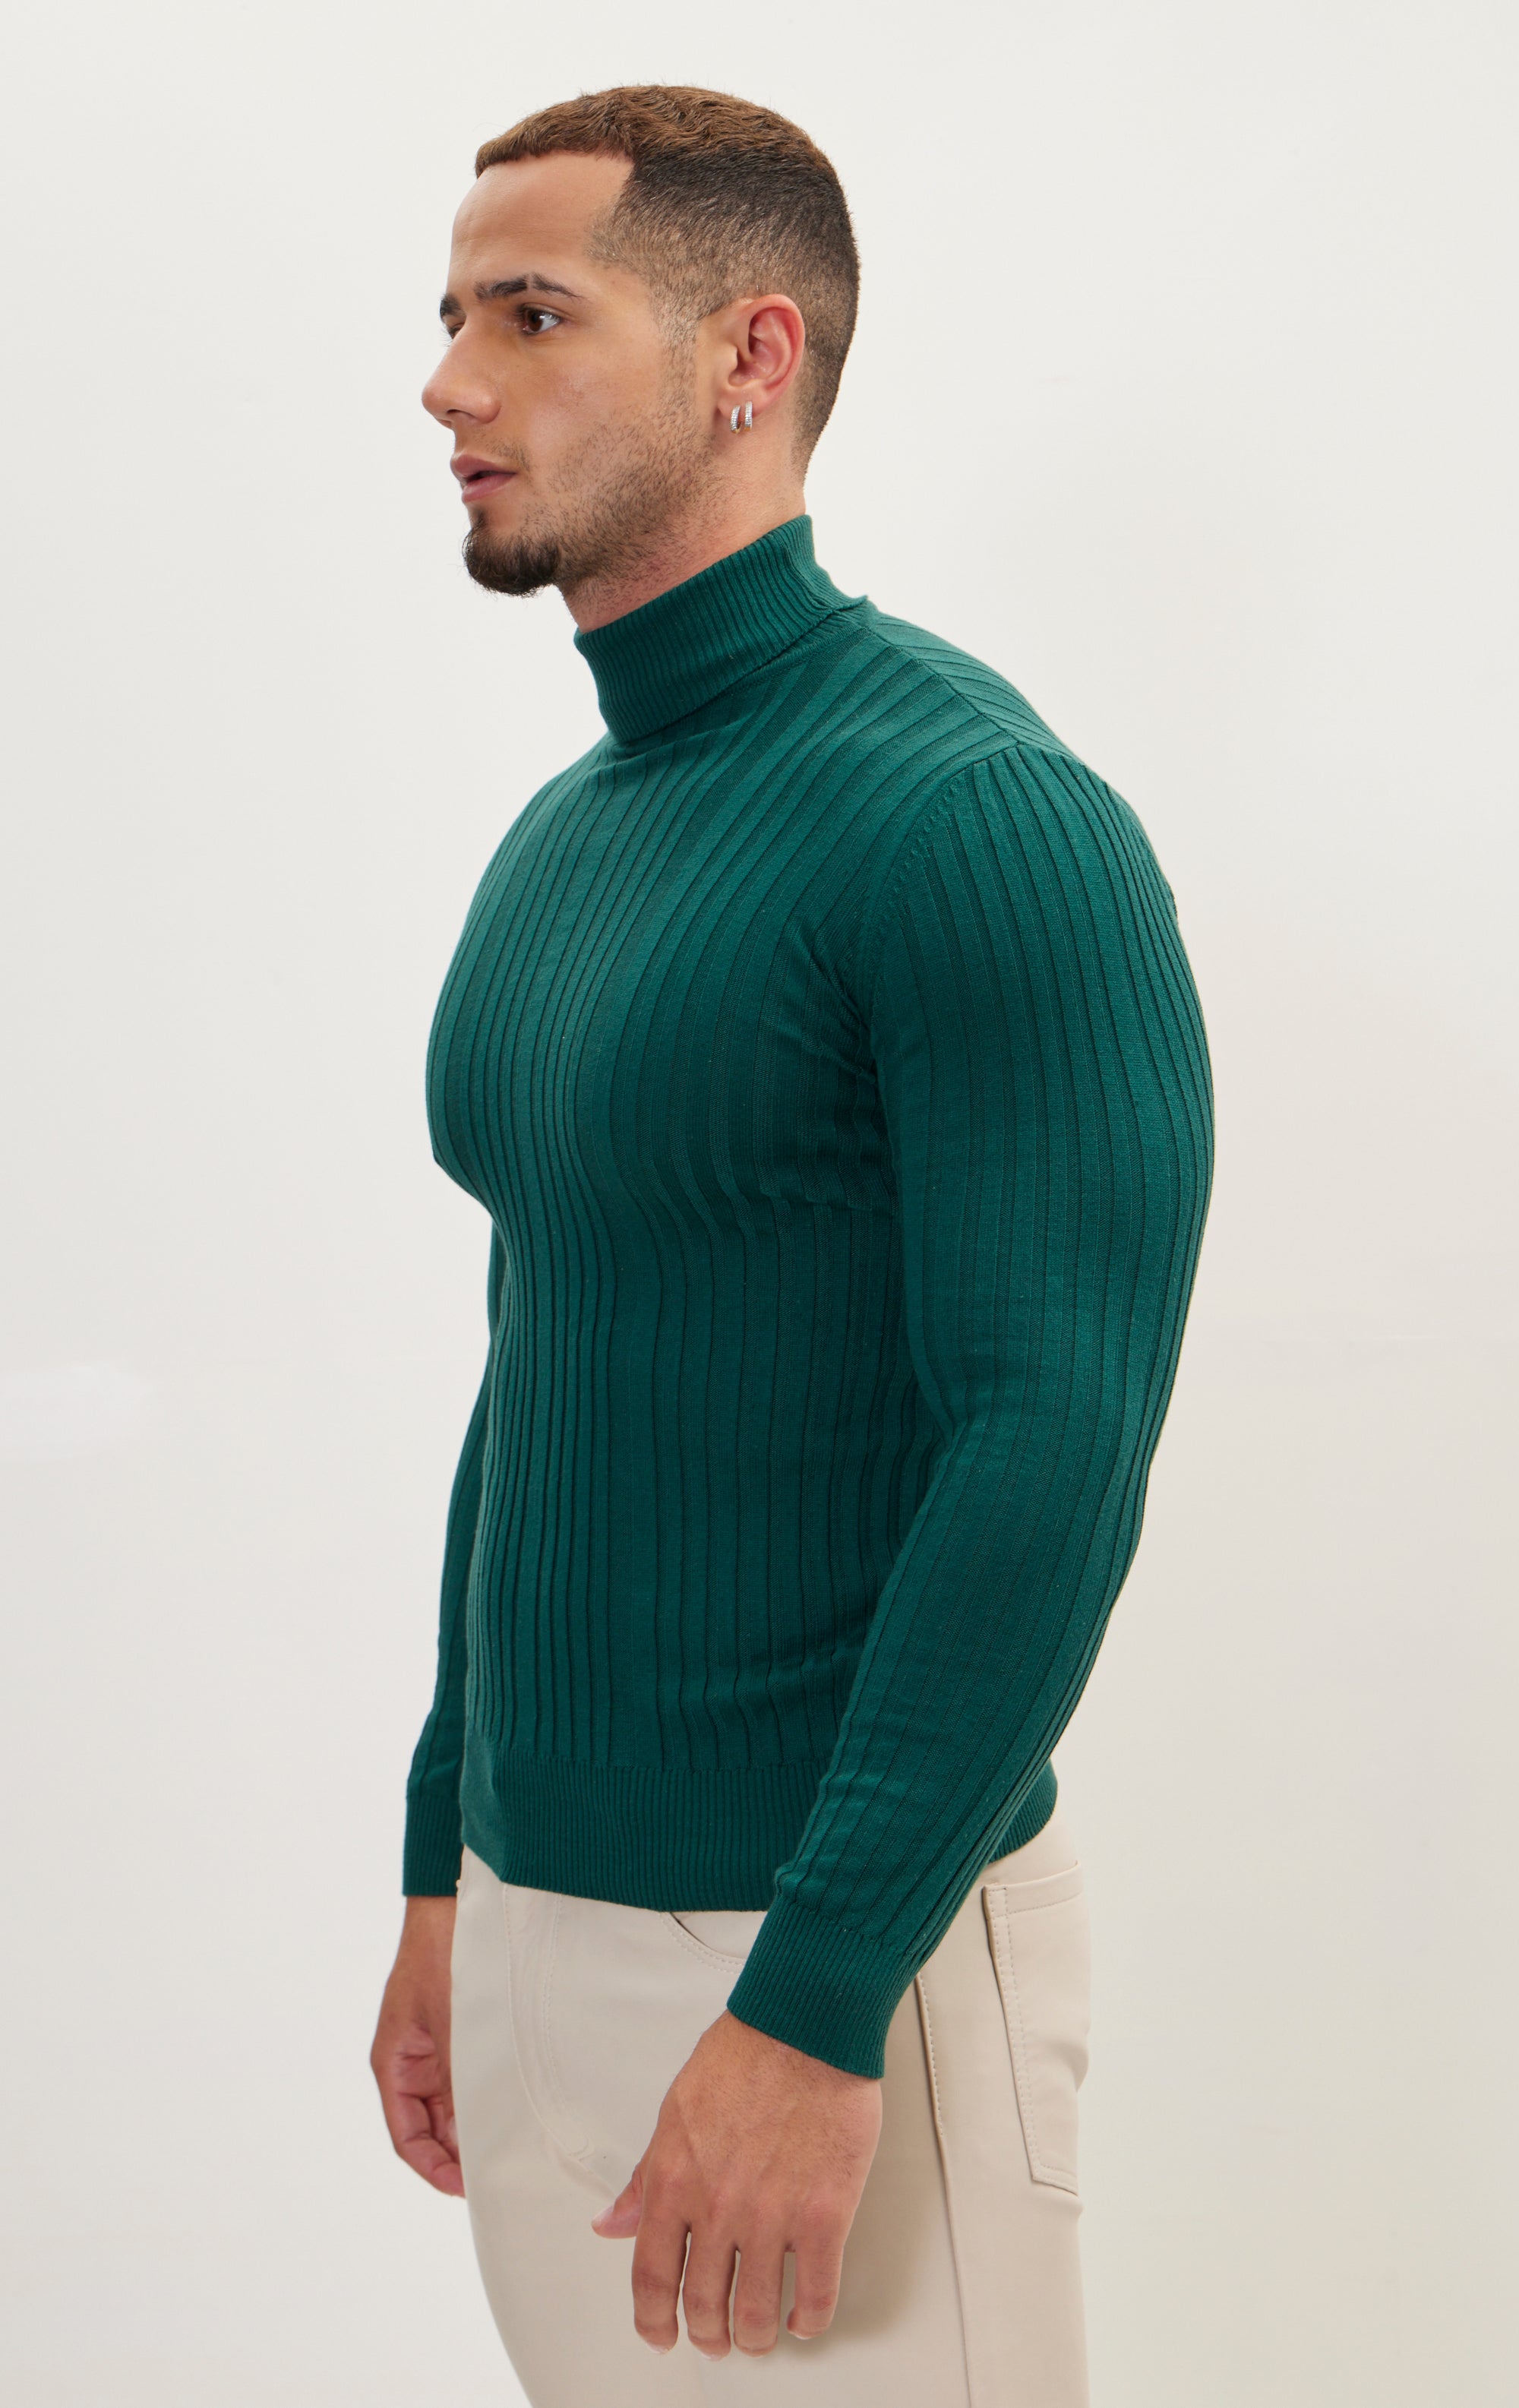 MENS MOCK NECK AND ROLL NECK SWEATERS IN FITTED / RELAXED